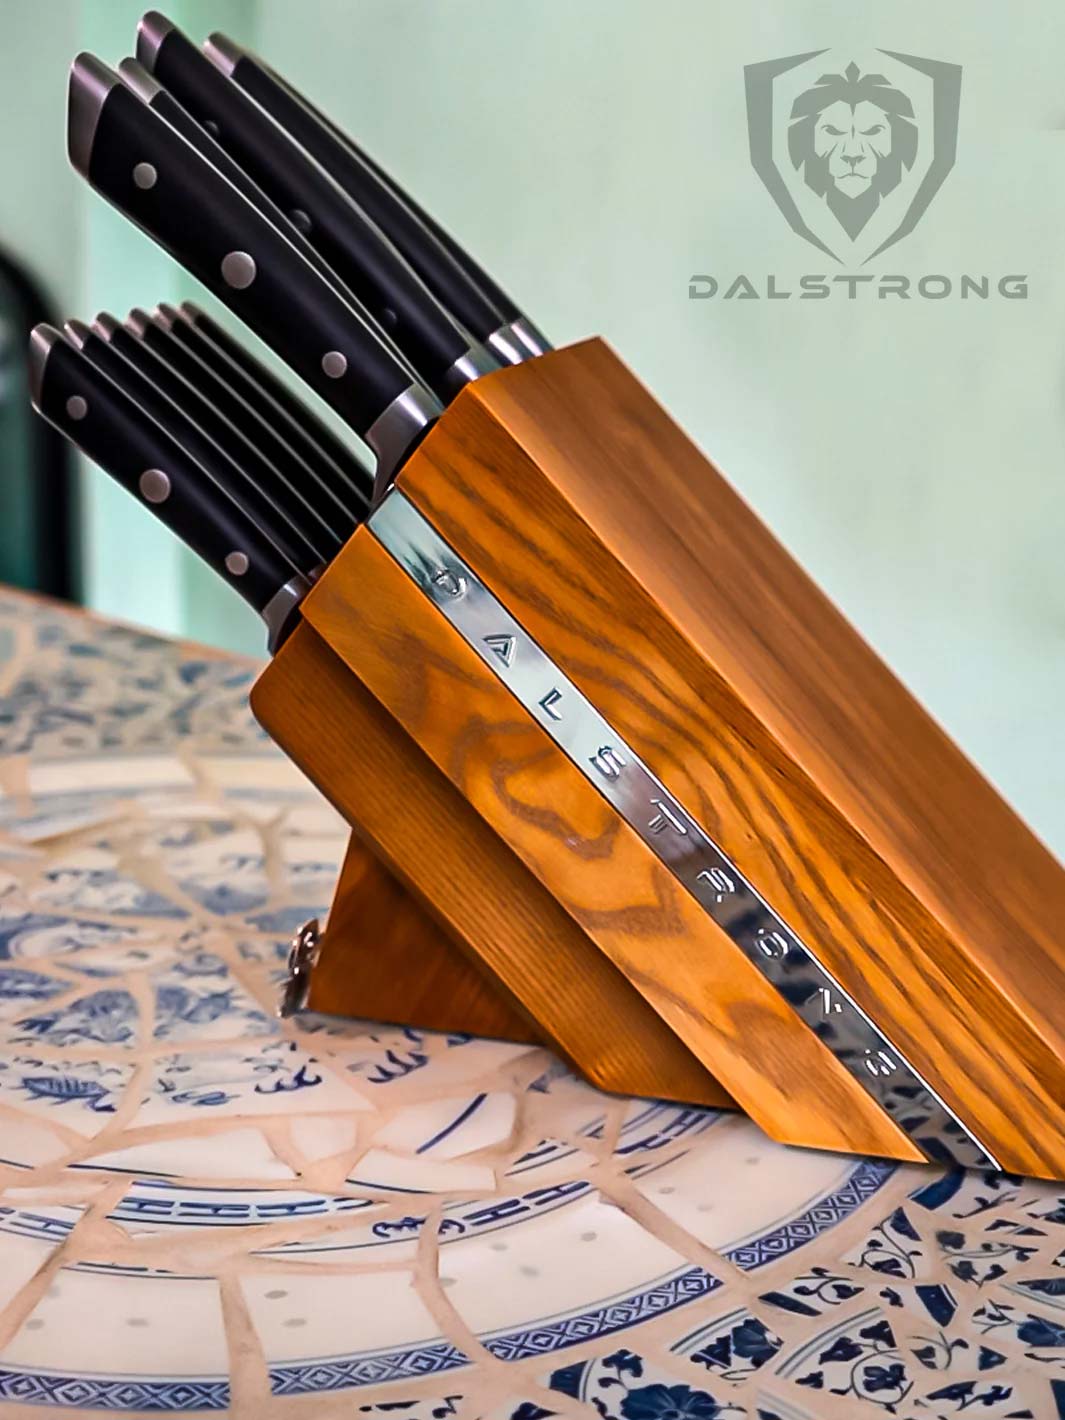 Dalstrong gladiator series 12 piece knife block set with black handles on top of a table.